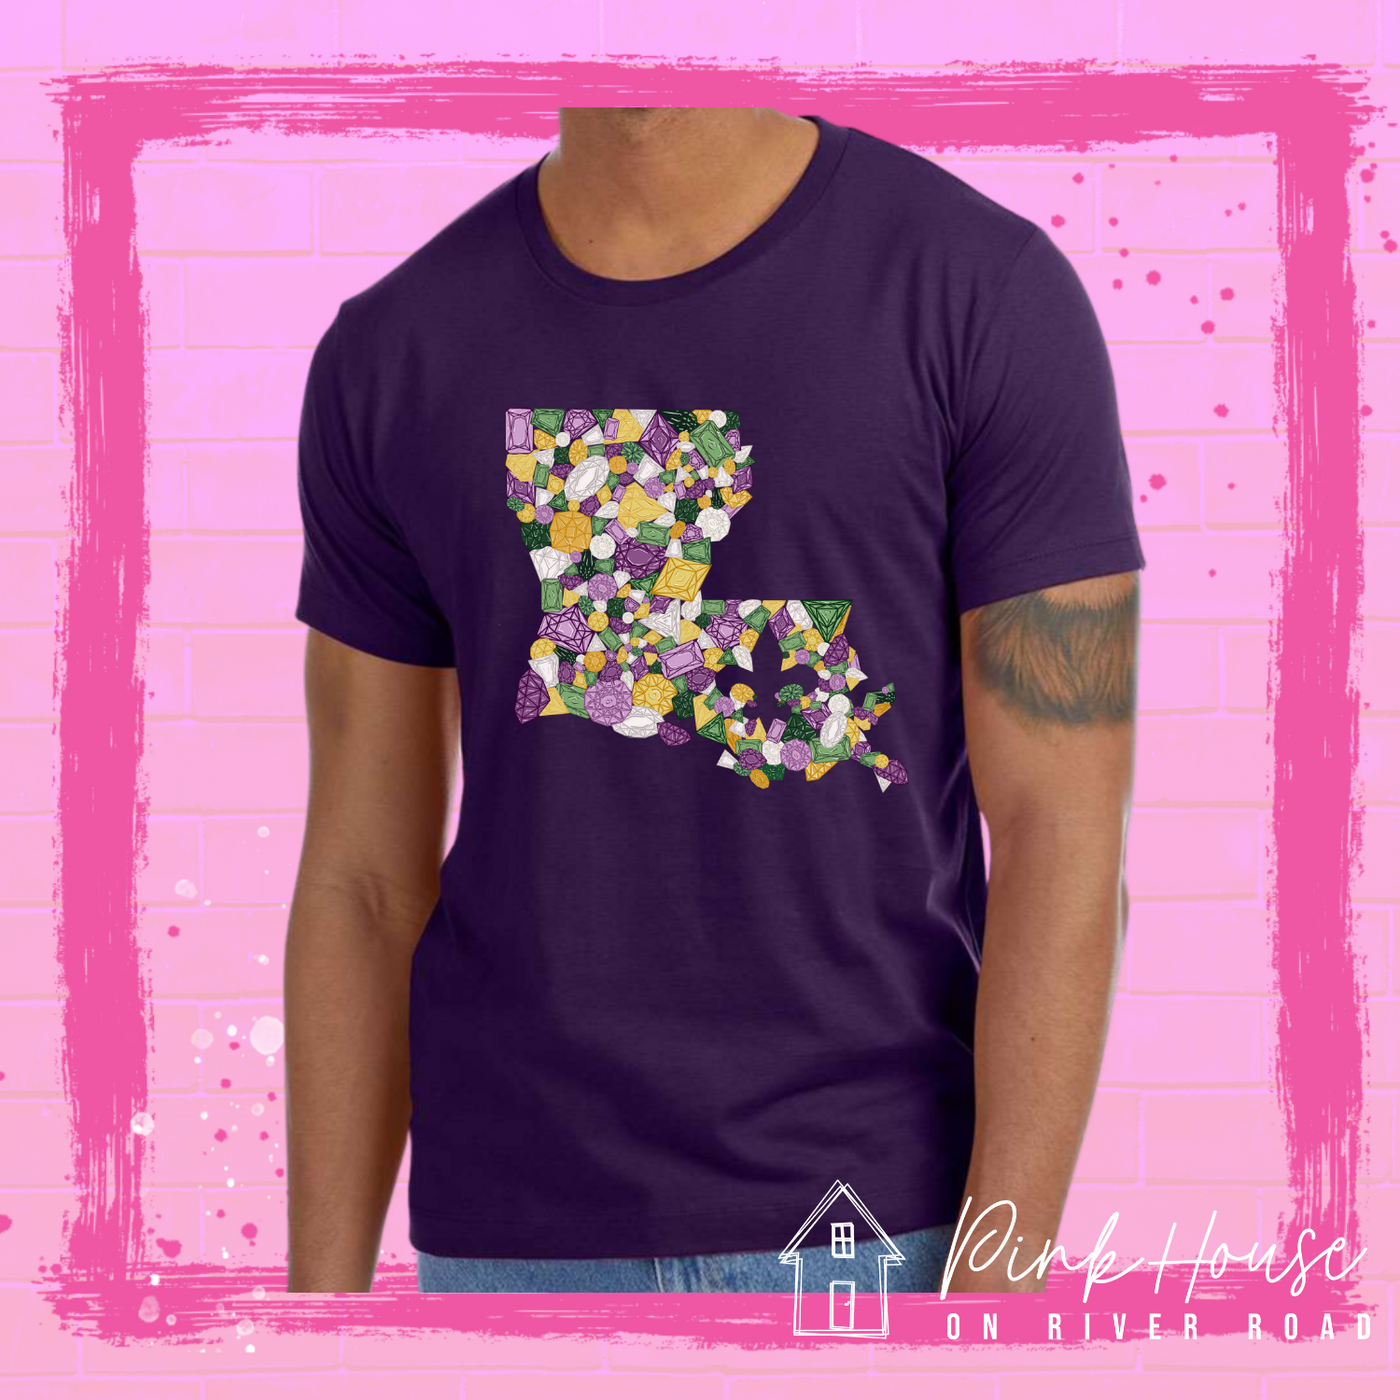 Dark Purple tee with a graphic of the state of Louisiana compromised of different shapes and sizes of purple, green, yellow and clear jewels.